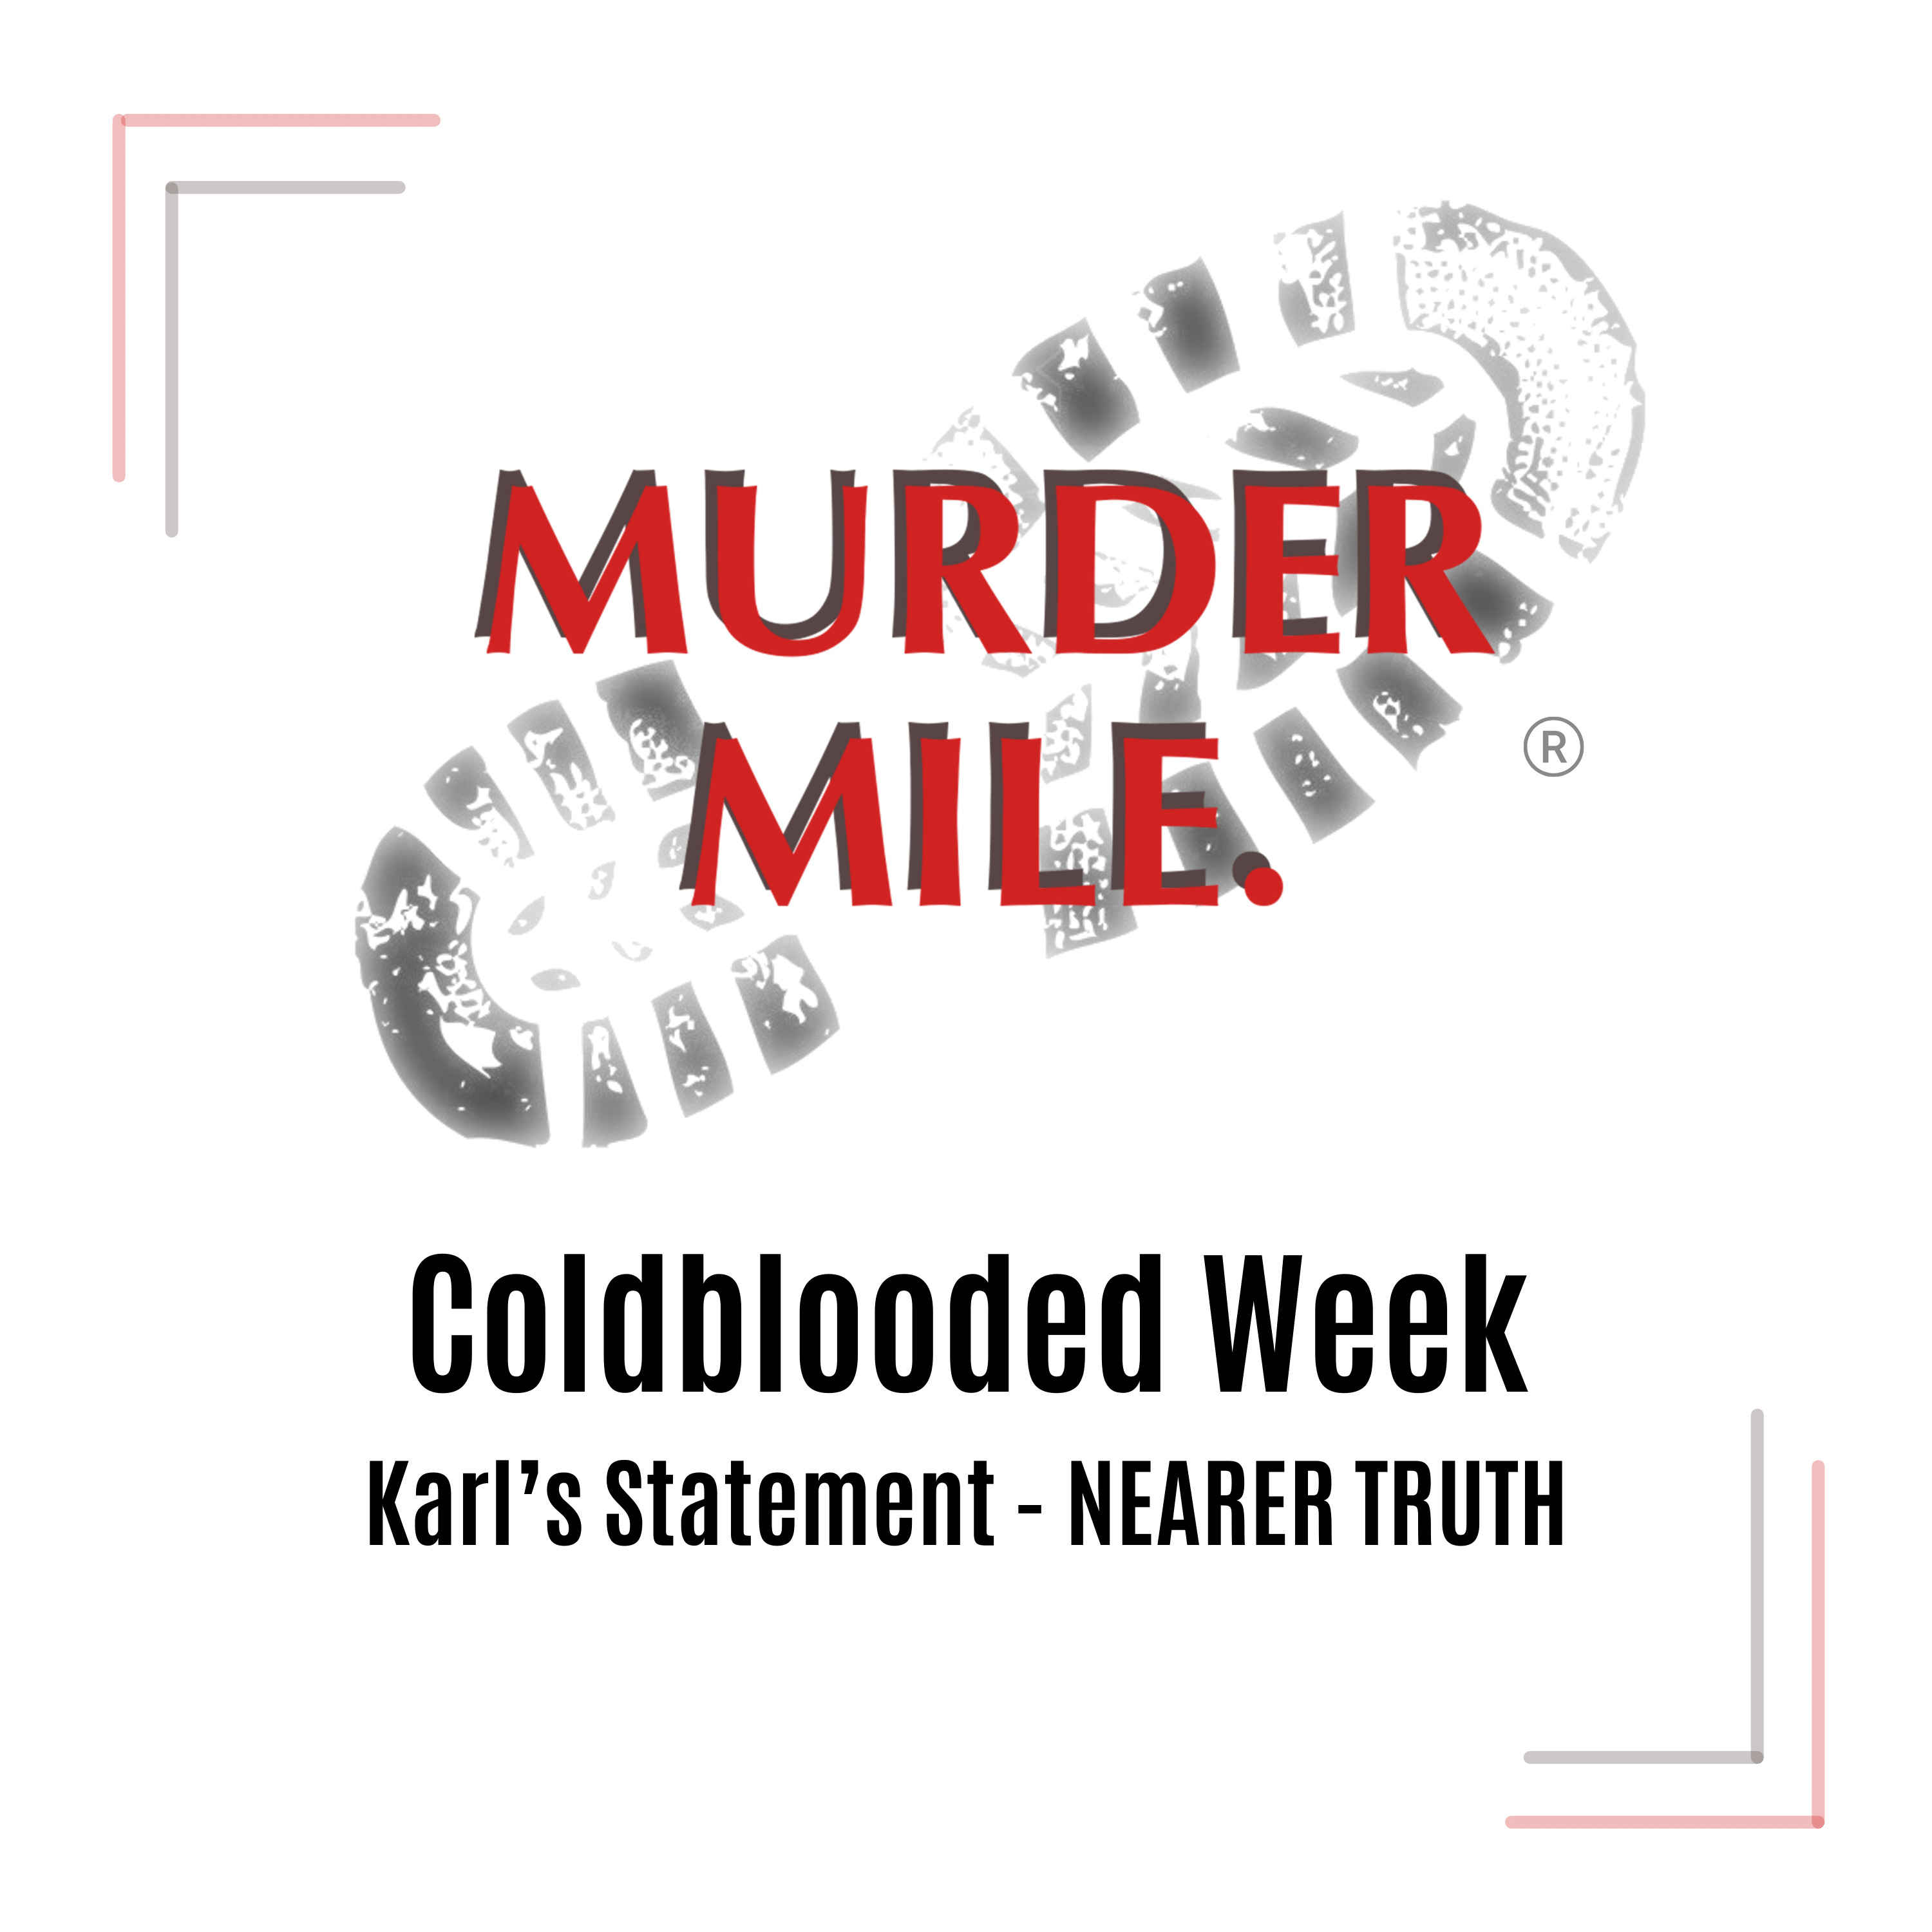 Coldblooded Week - Karl's Second Statement – NEARER TRUTH